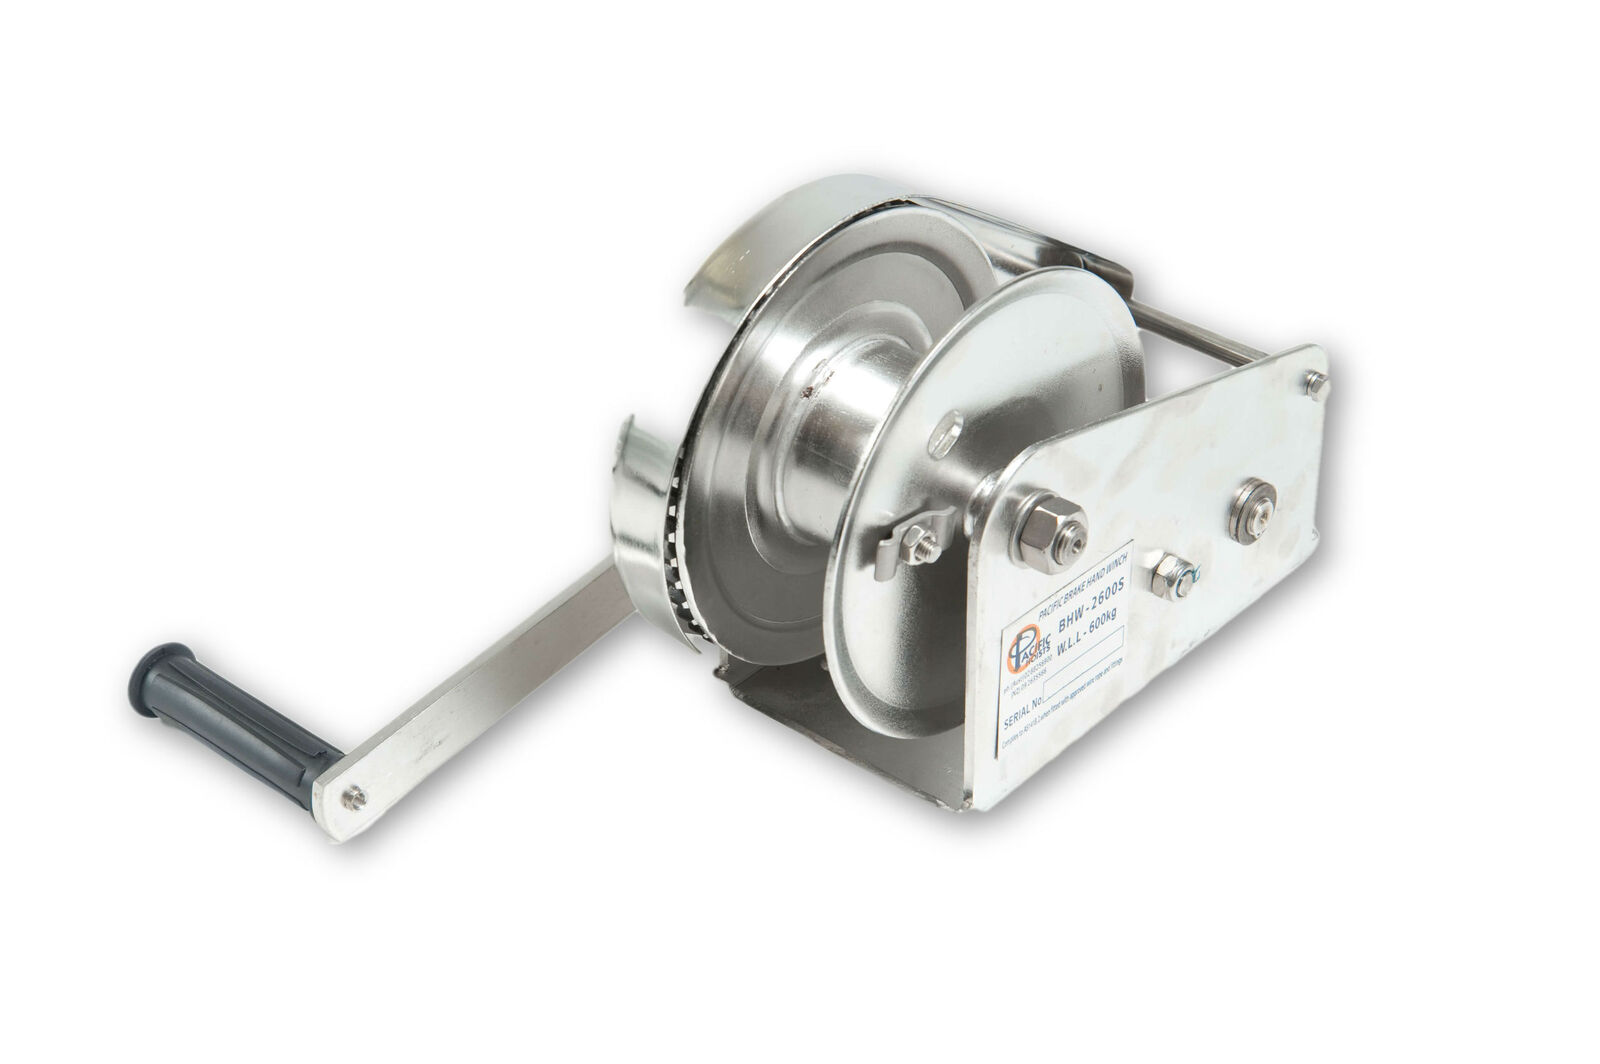 Stainless Steel Braked Hand Winch Boat Winch, Capacity: 545kg/1200 lbs